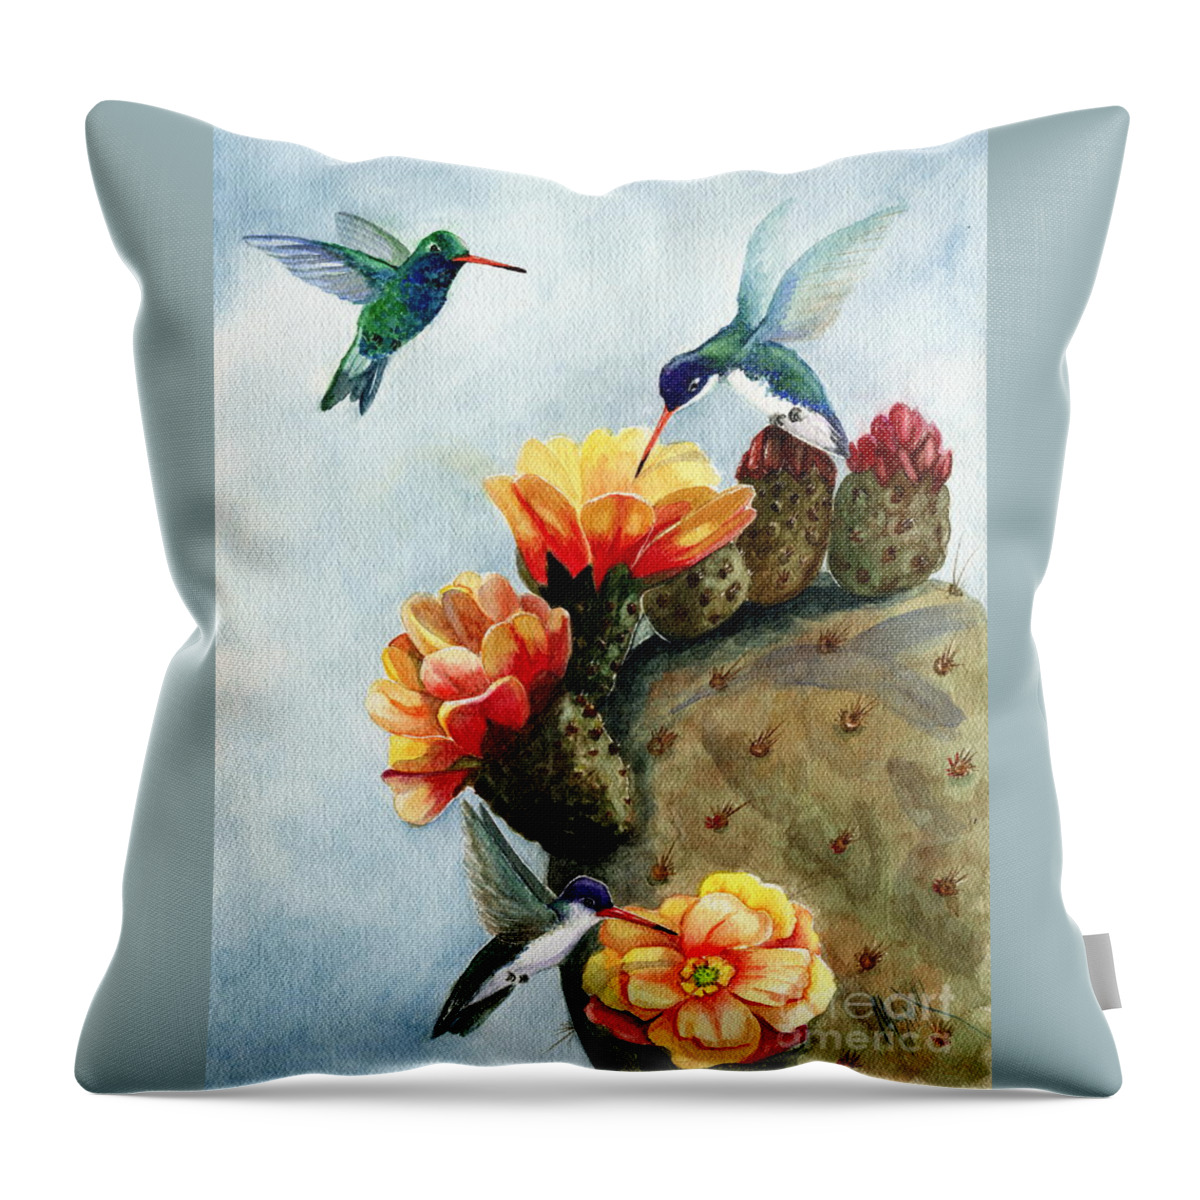 Hummingbirds Throw Pillow featuring the painting Baby Makes Three by Marilyn Smith